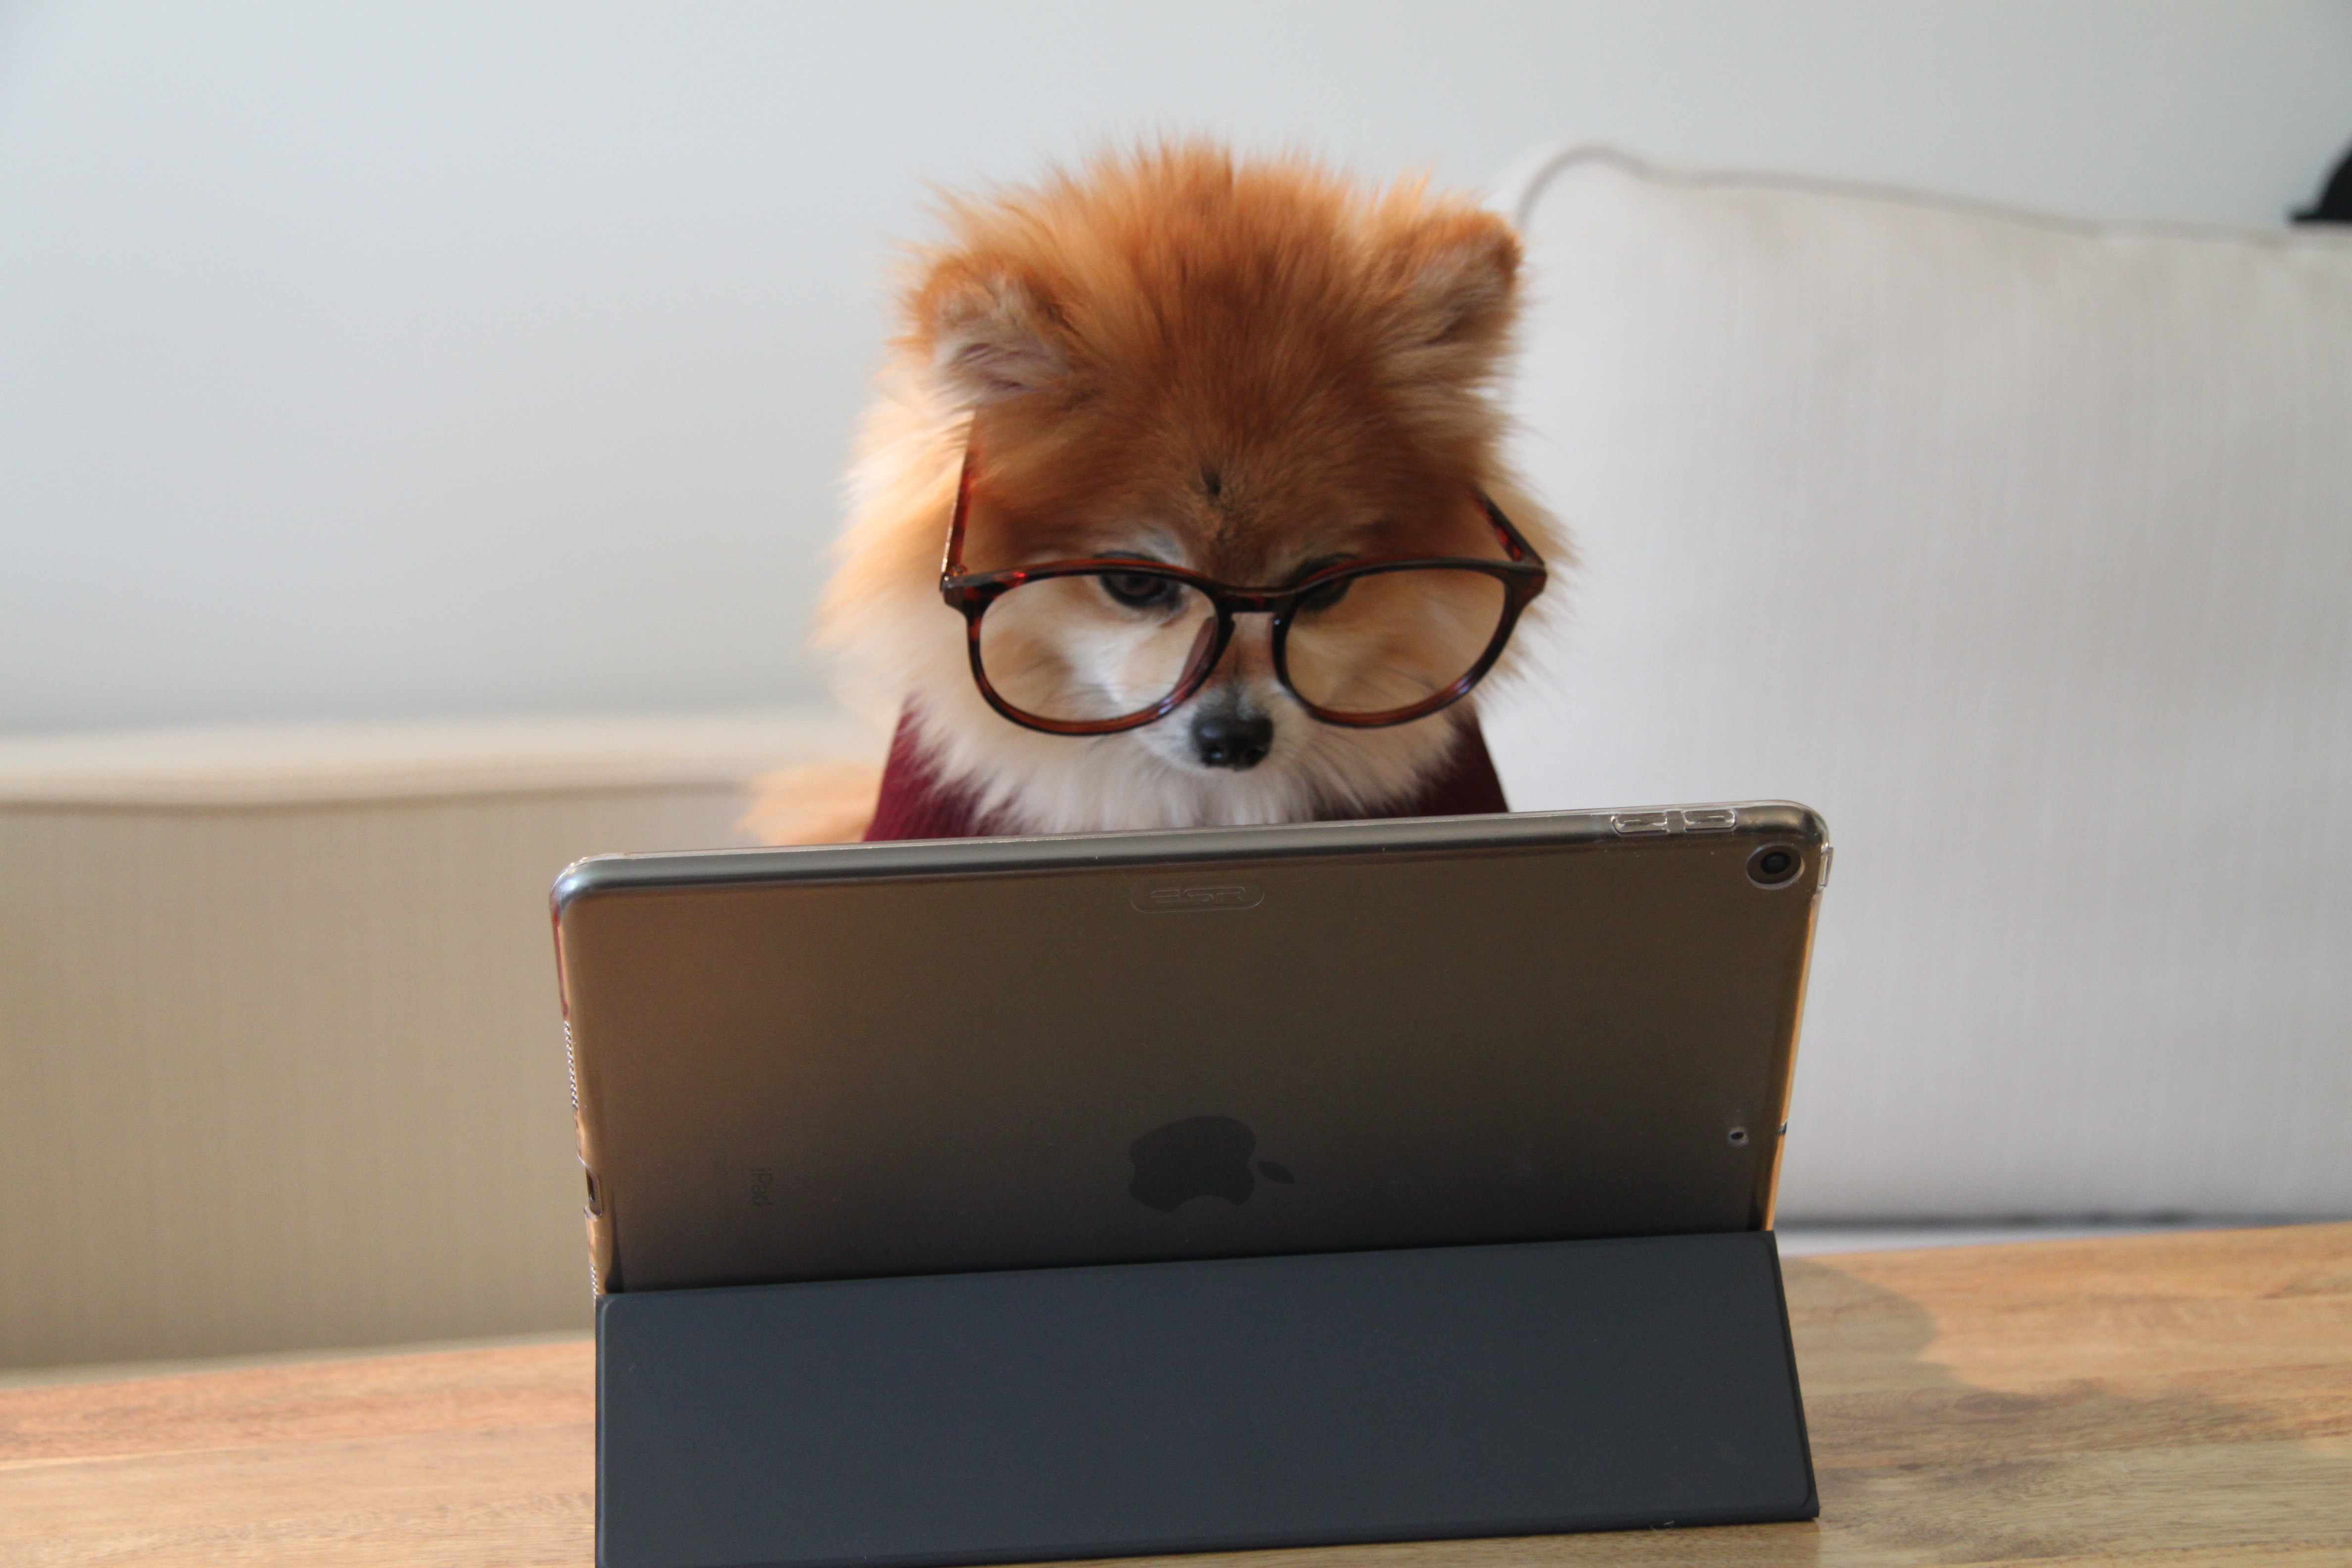 Pomeranian dog with glasses on at a laptop